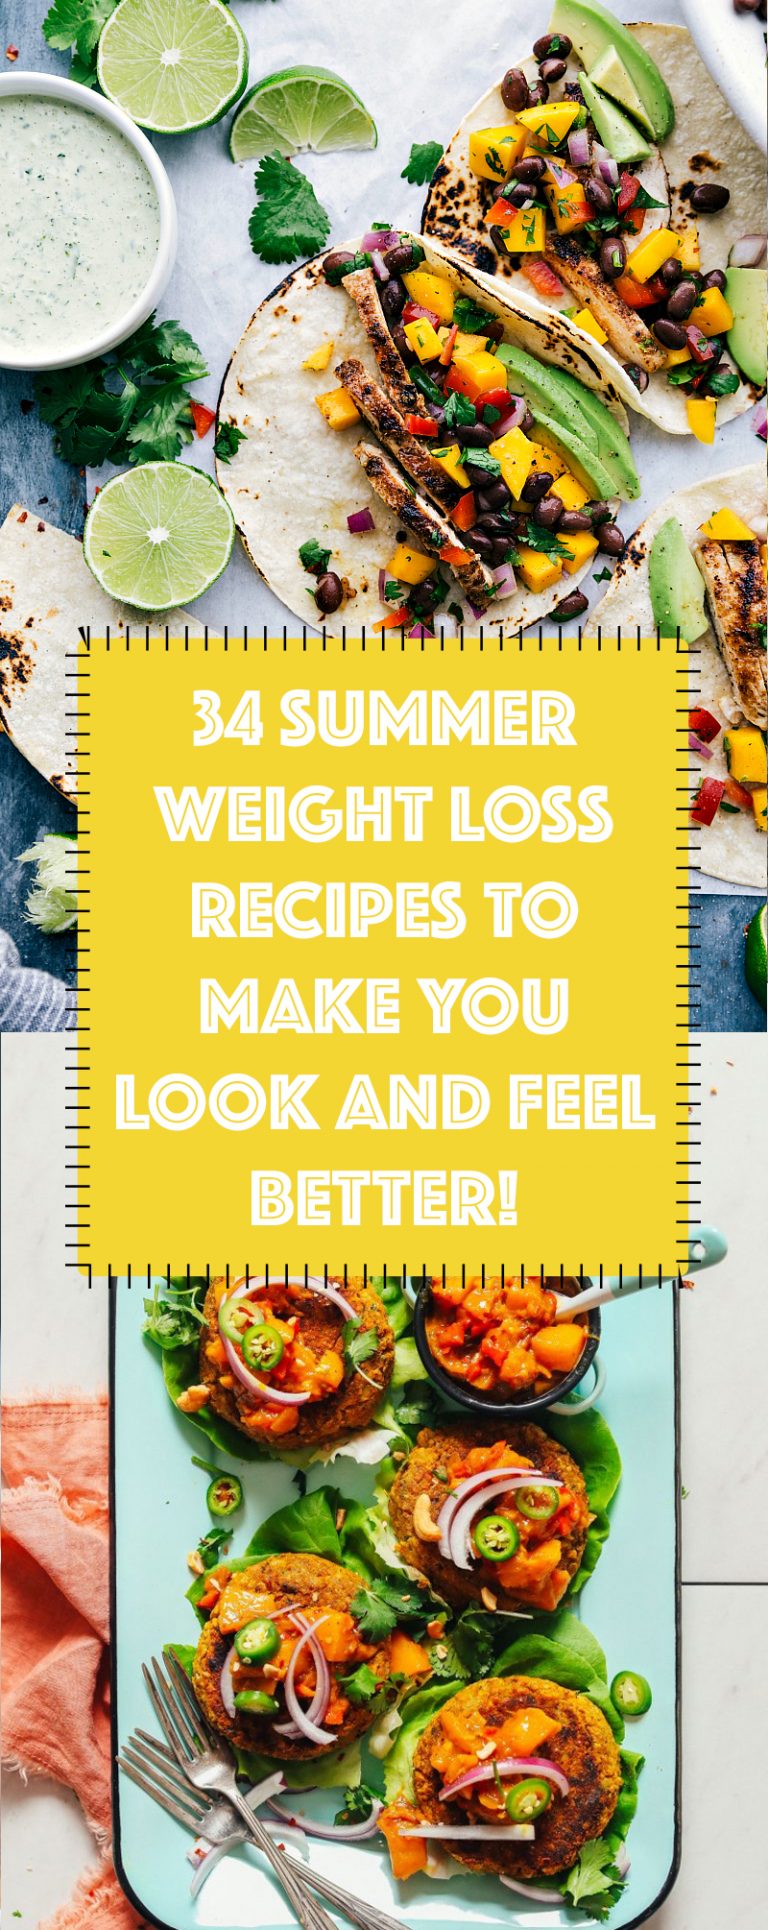 34 Summer Weight Loss Recipes To Help You Look And Feel Better ...